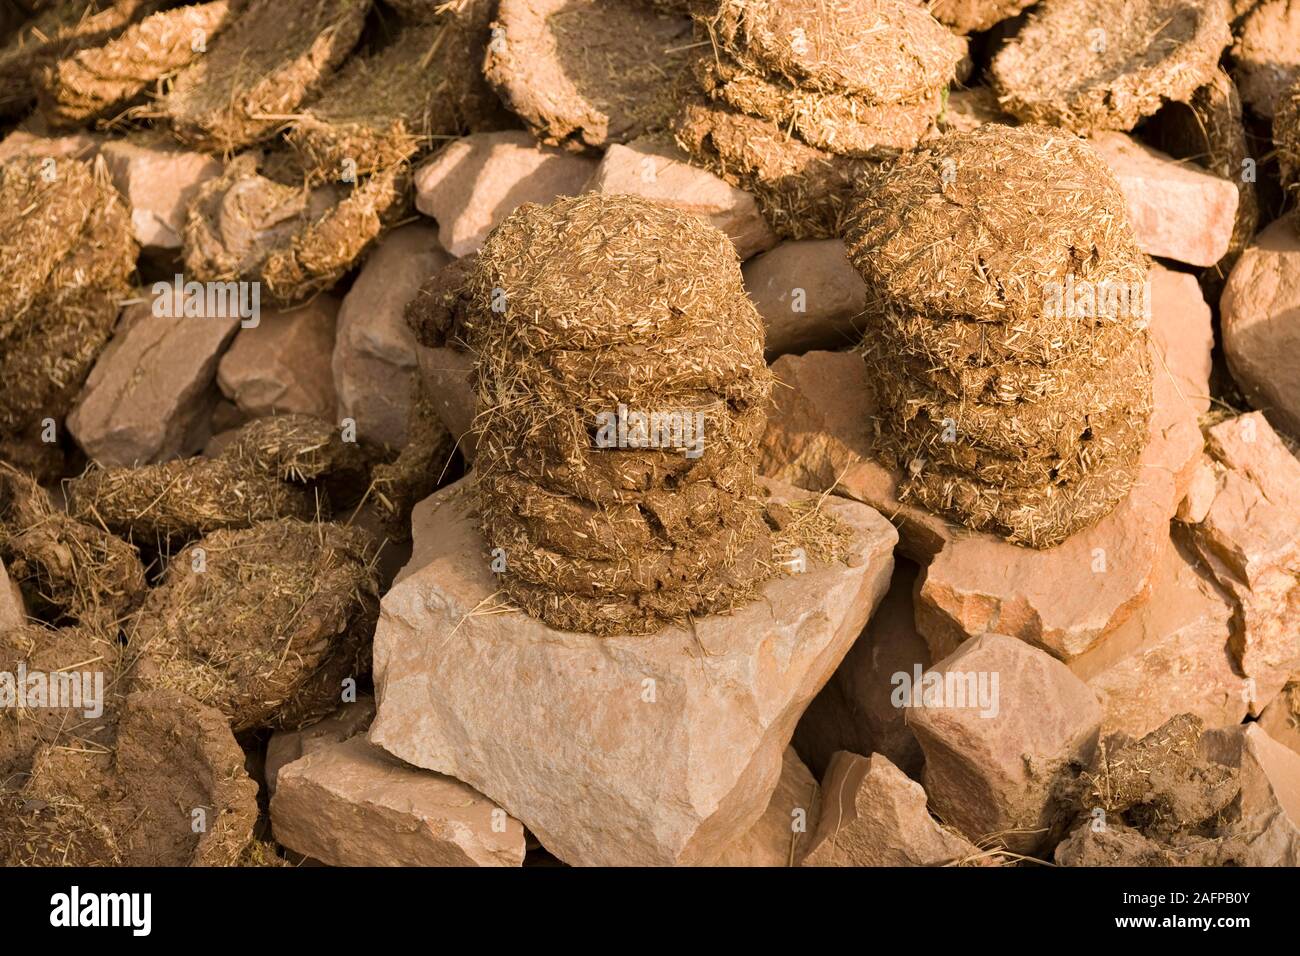 DUNG from Cattle (Bos indicus) and Water Buffalo (Bubalus bubalis).  Made into 'cakes' for fuel to burn. Assembled piles, sun drying  on a stone wall. Stock Photo